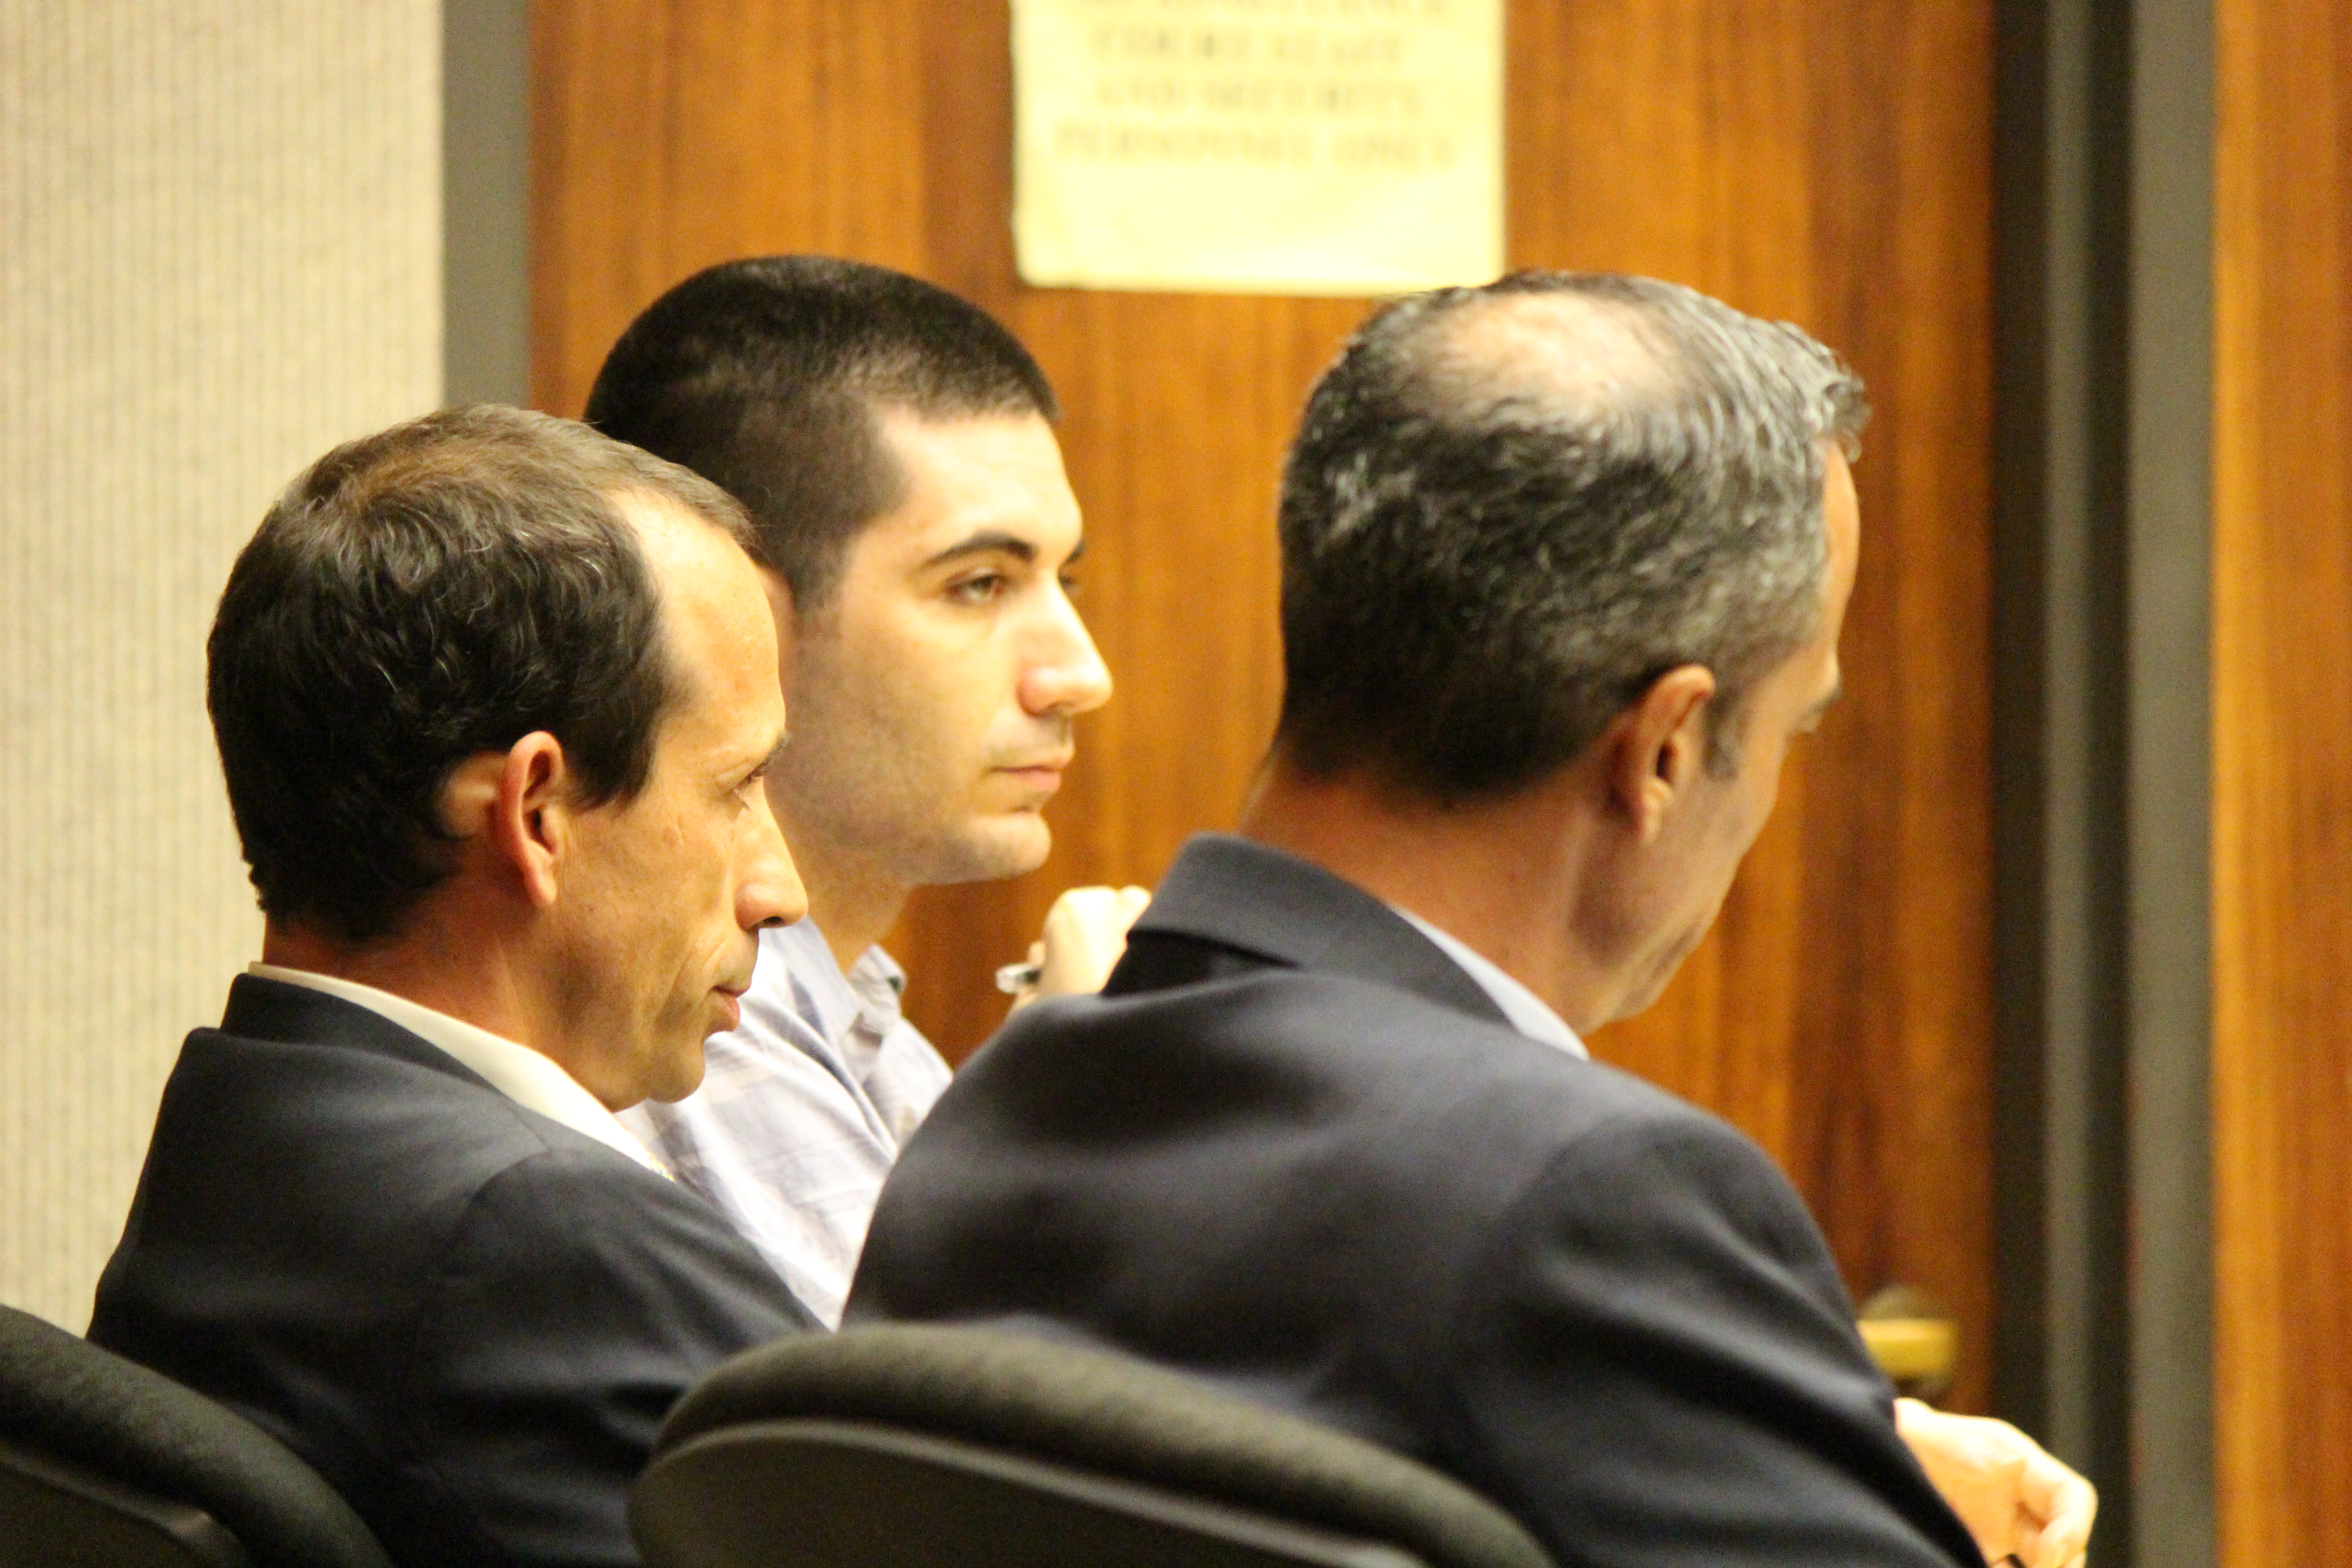 State v Capobianco trail. Defense Attorney Jon Apo in foreground (right) with fellow defense attorney Matthew Nardi (left) and defendant Steven Capobianco (background middle) . PC: 11.30.16 by Wendy Osher.